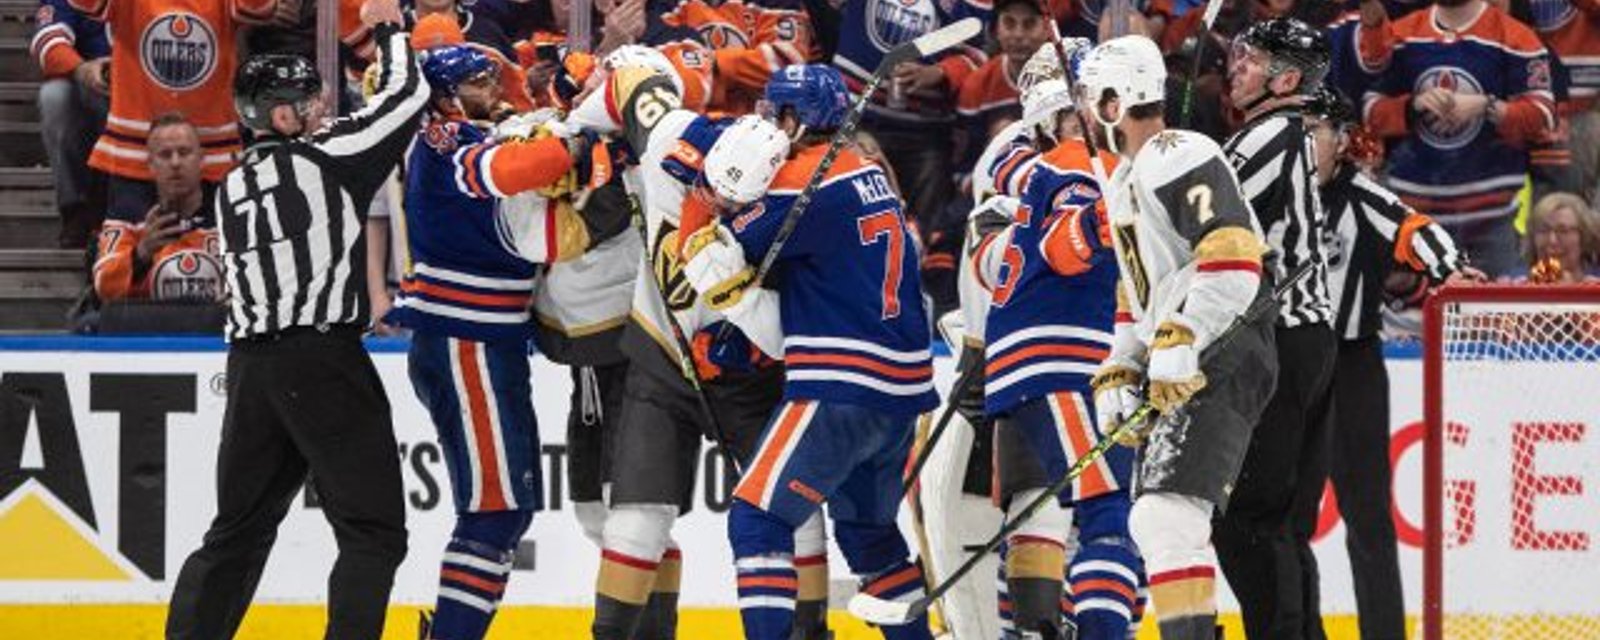 Another suspension is demanded by fans in Edmonton-Vegas series!